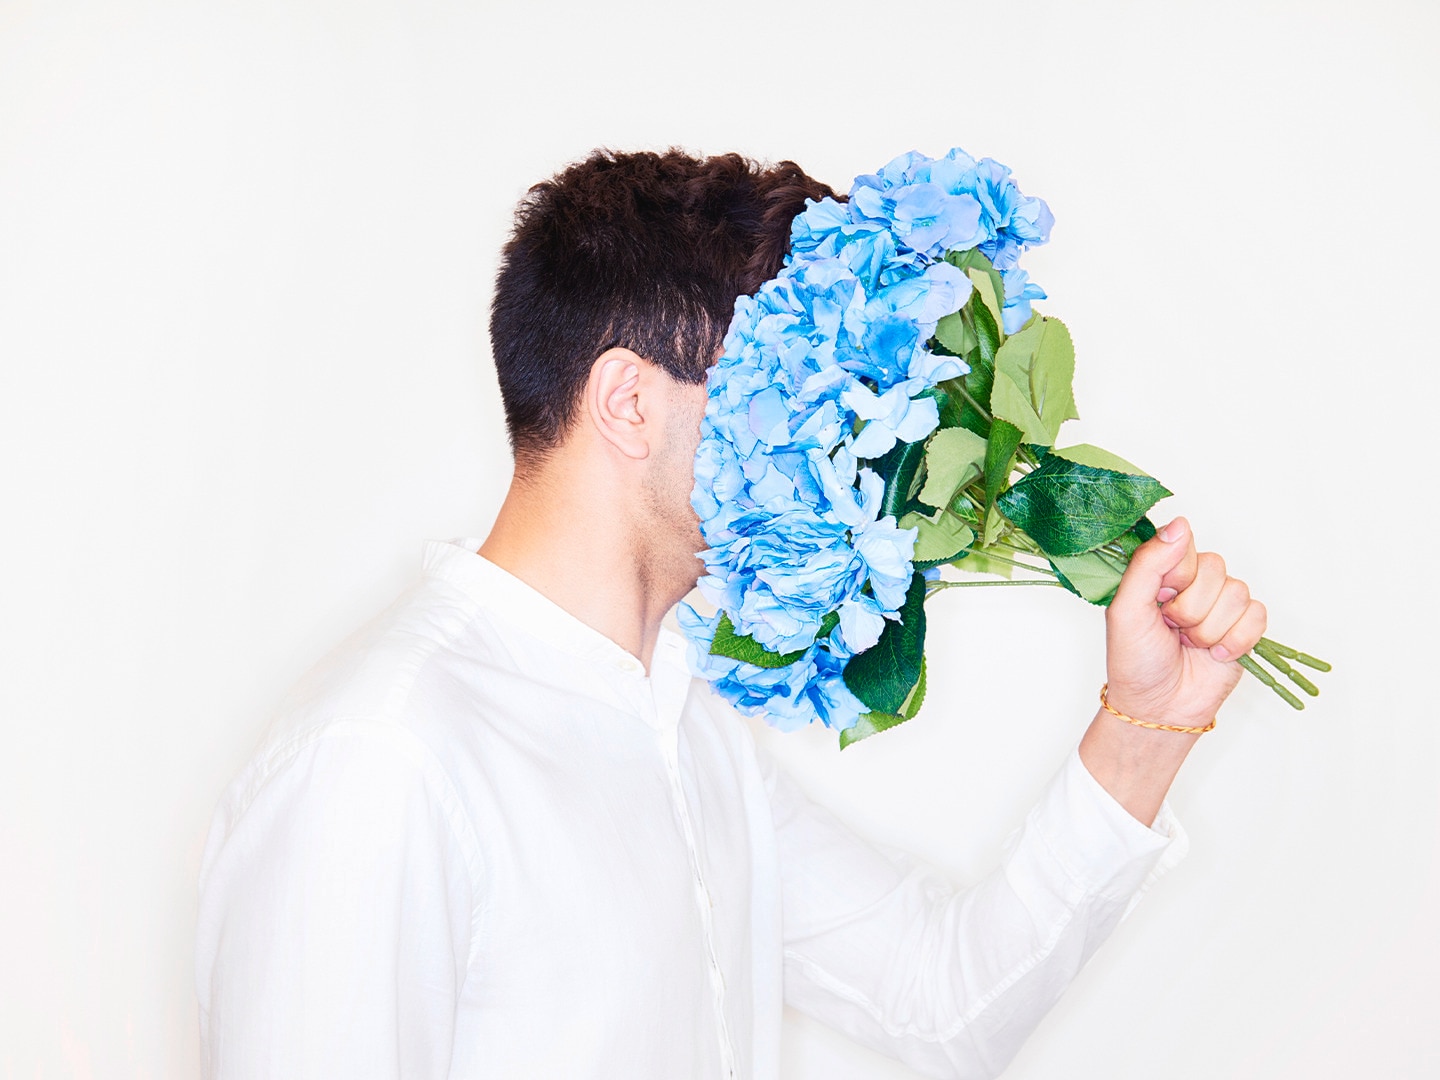 Guy with his head in a bouquet of blue flowers